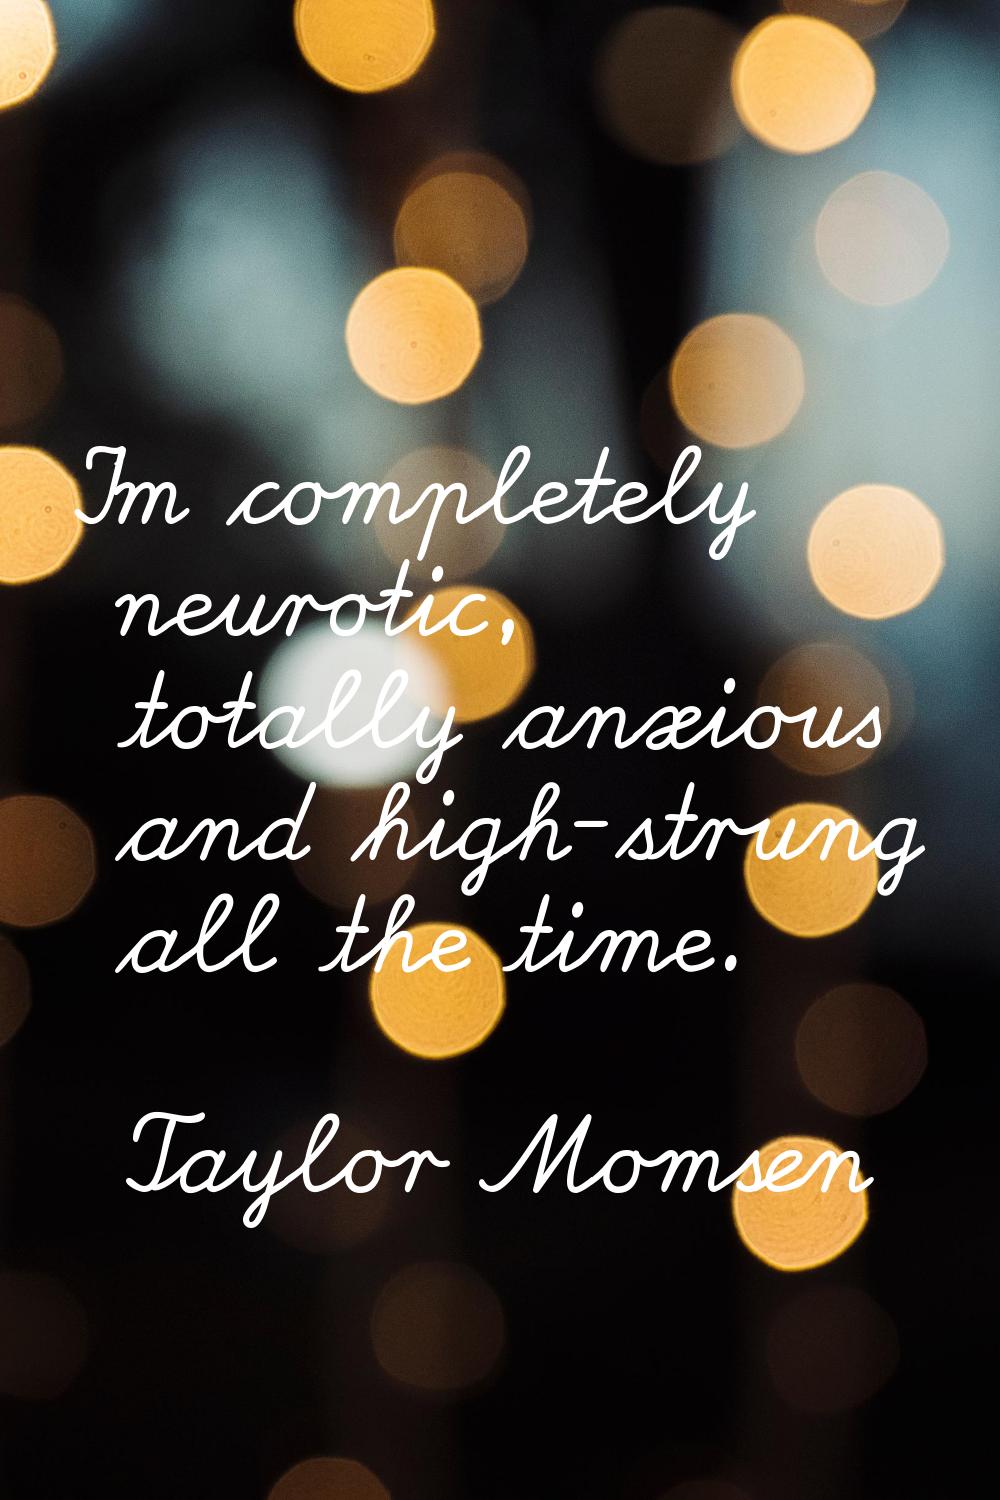 I'm completely neurotic, totally anxious and high-strung all the time.